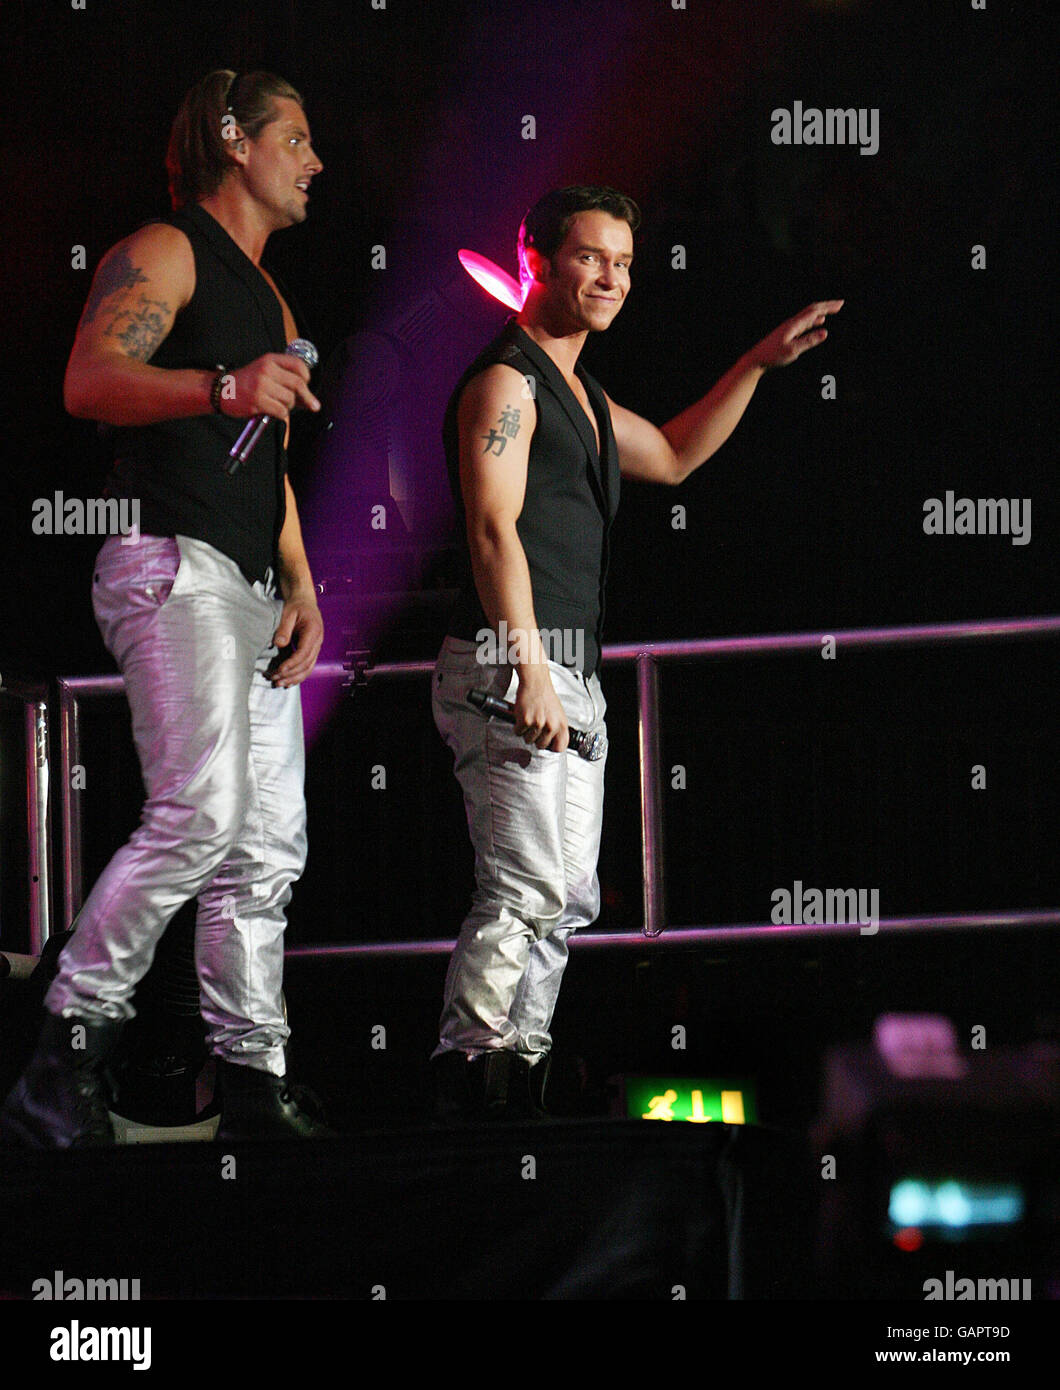 Keith Duffy and Stephen Gately Boyzone perform live in concert at the Odyssey Arena Belfast. Stock Photo